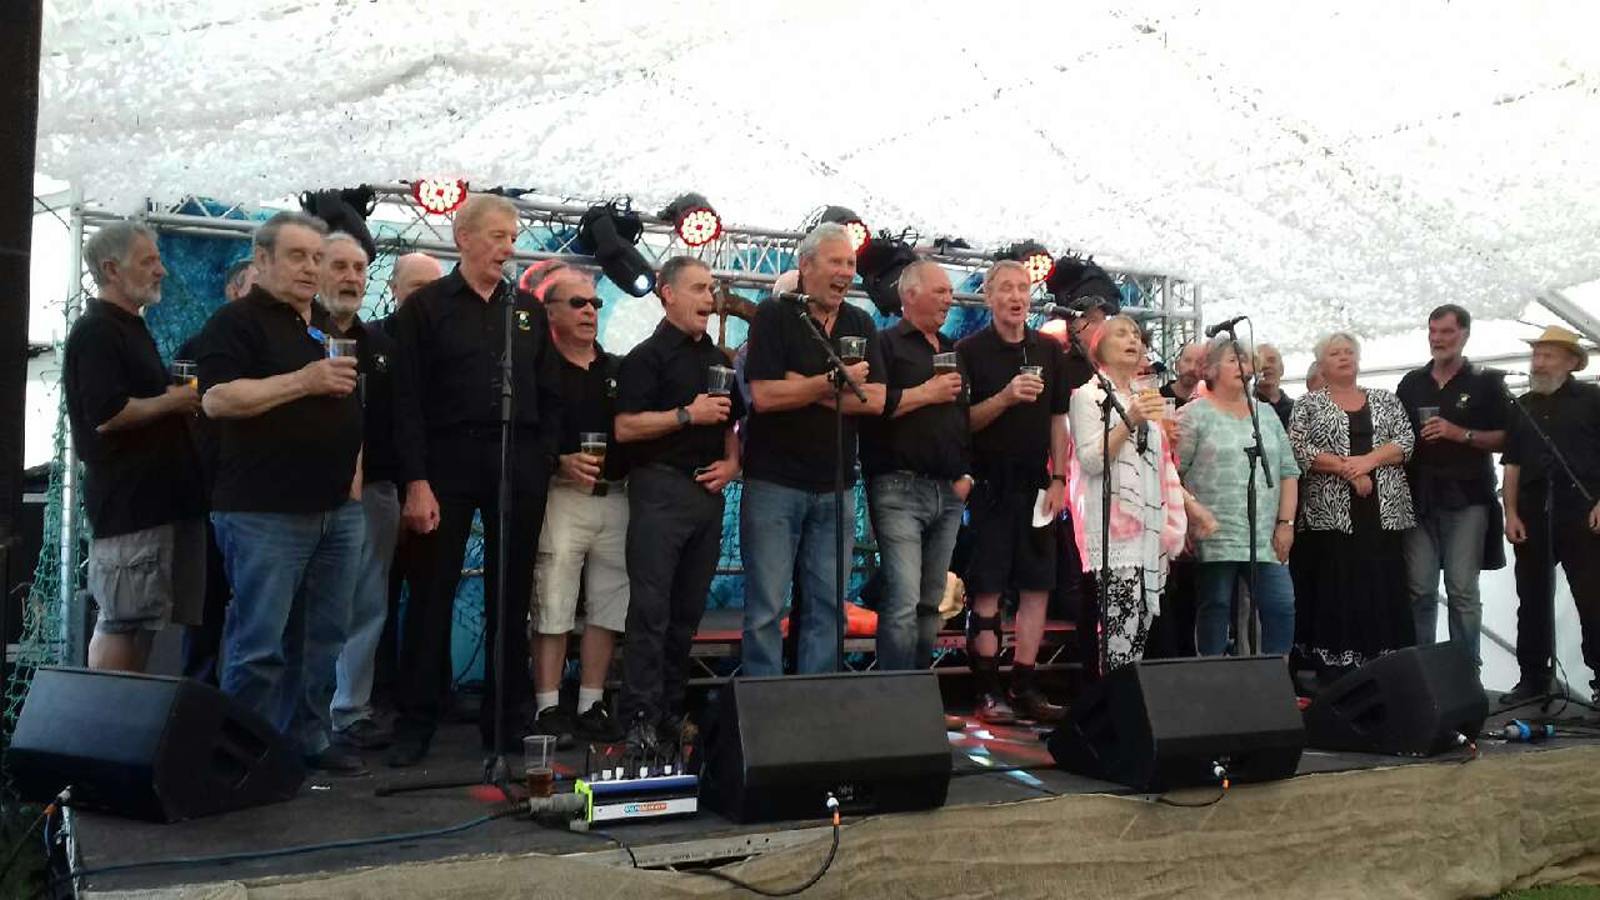 The Cadgwith Singers are one of over 70 groups will be performing at this years festival